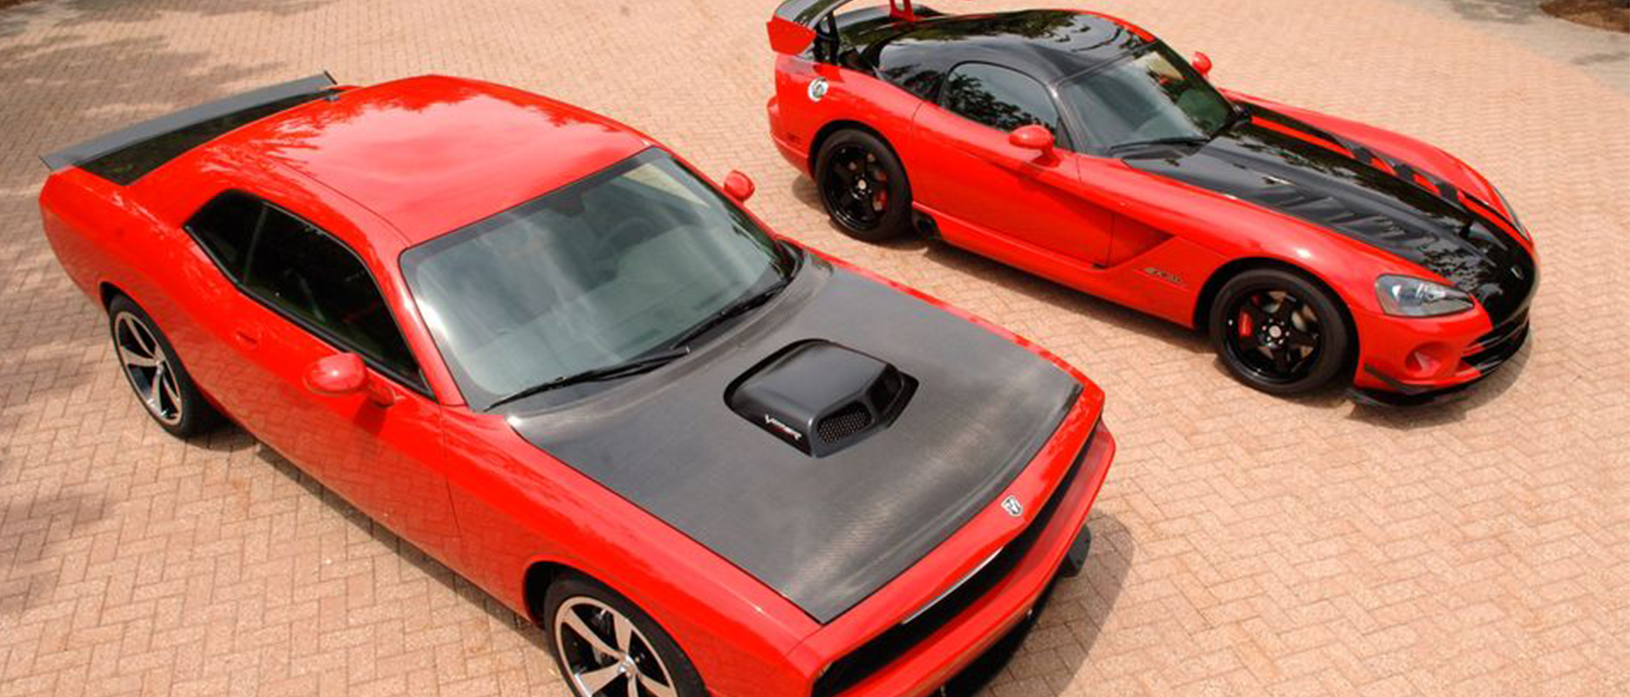 Dodge Viper parked next to a Dodge Challenger